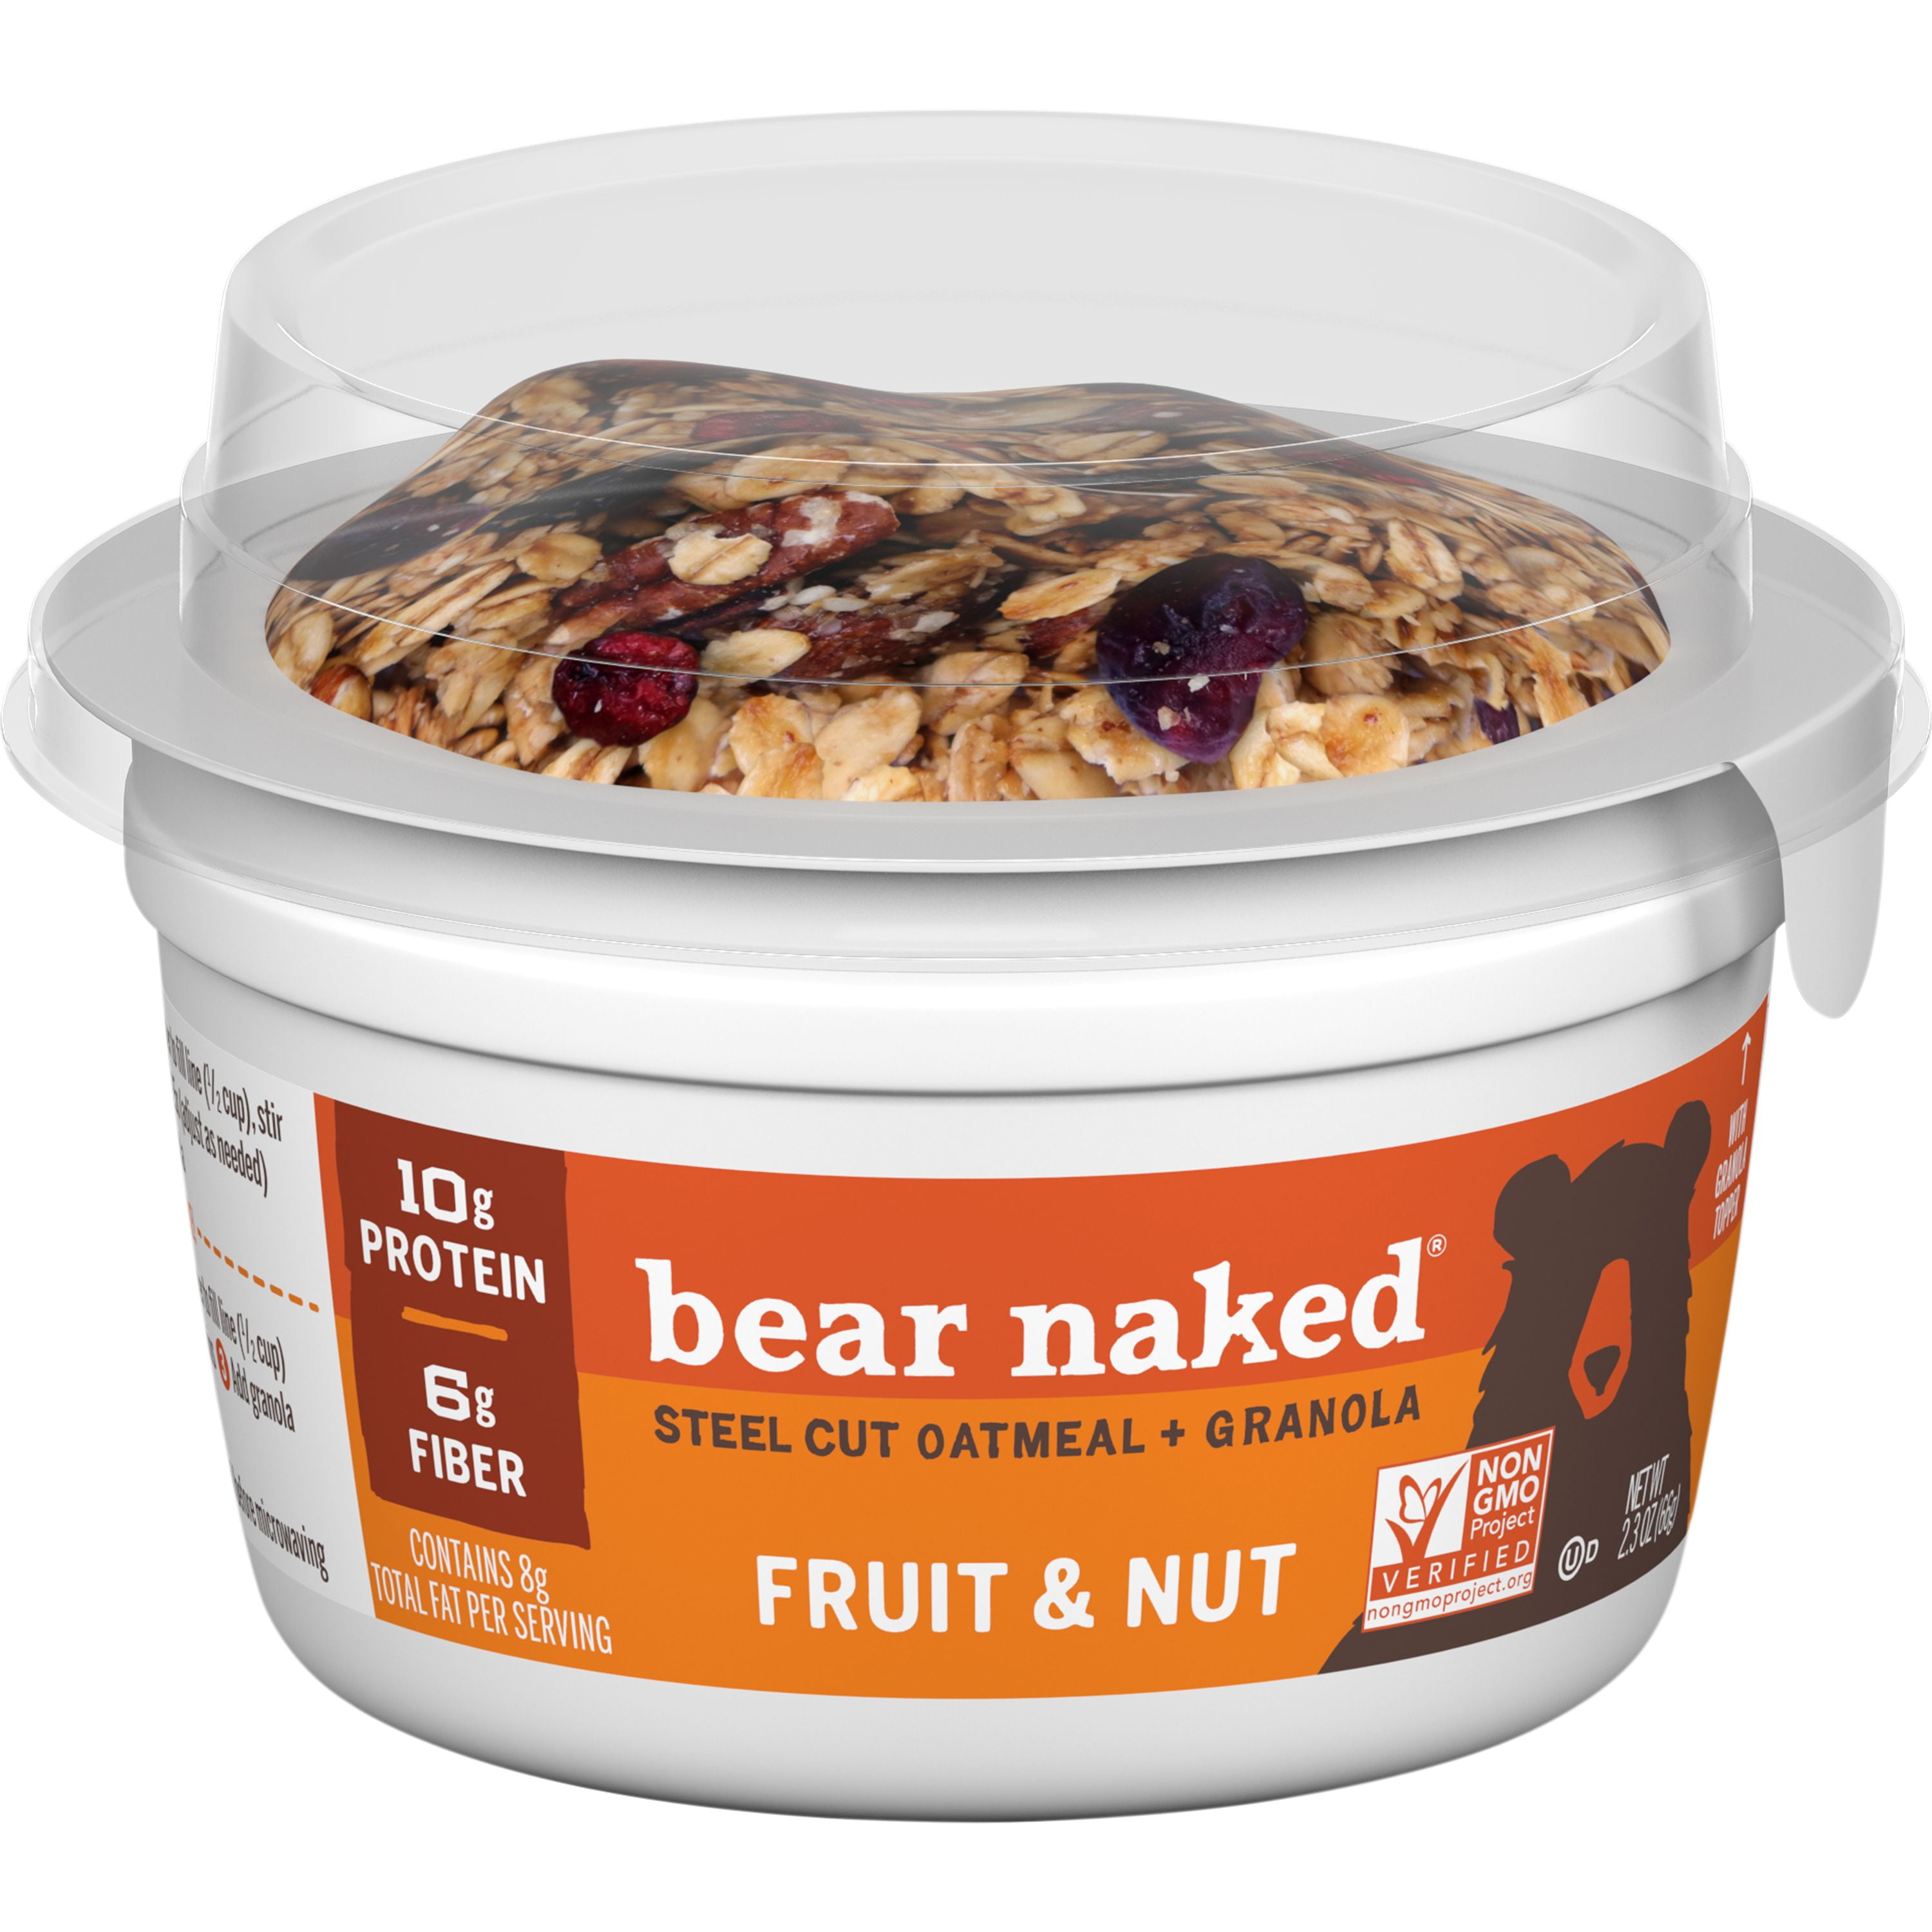 Bear Naked Granola And Steel Cut Oatmeal Fruit And Nut Oz Cup